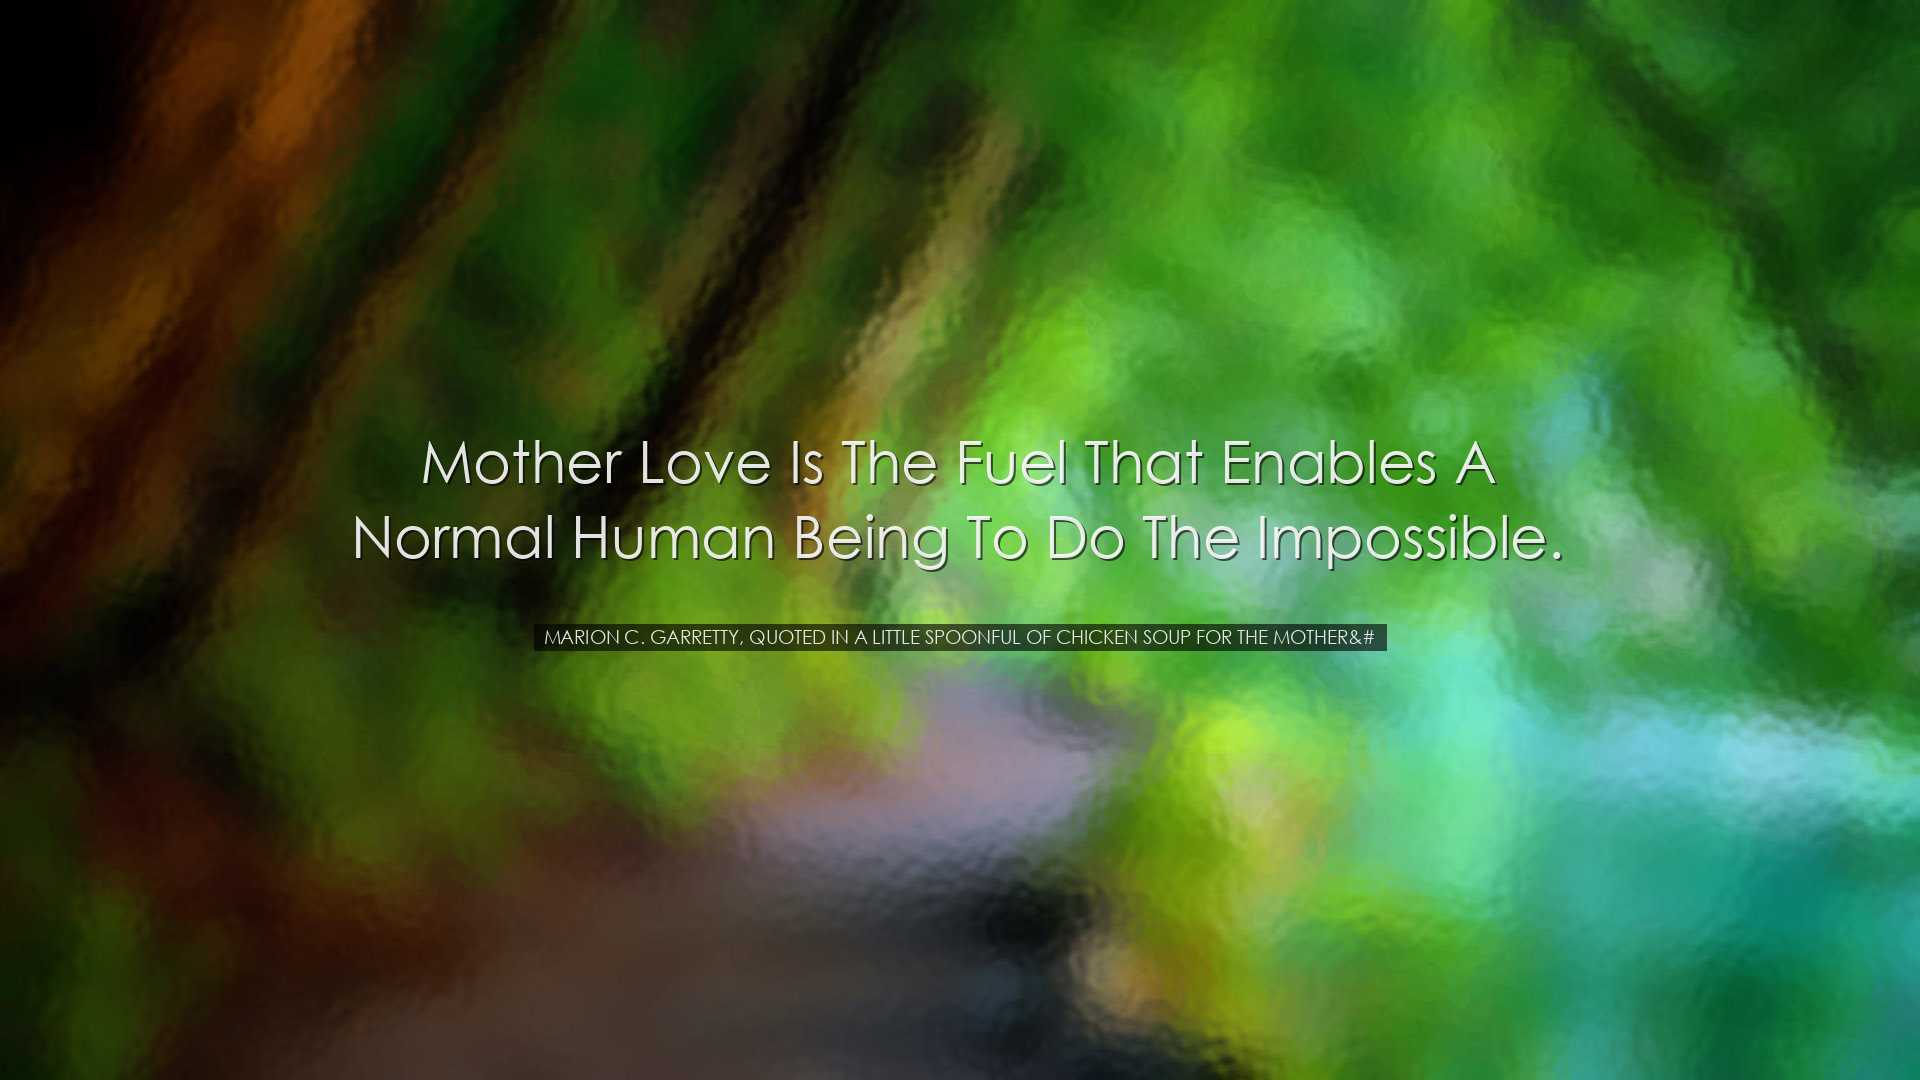 Mother love is the fuel that enables a normal human being to do th